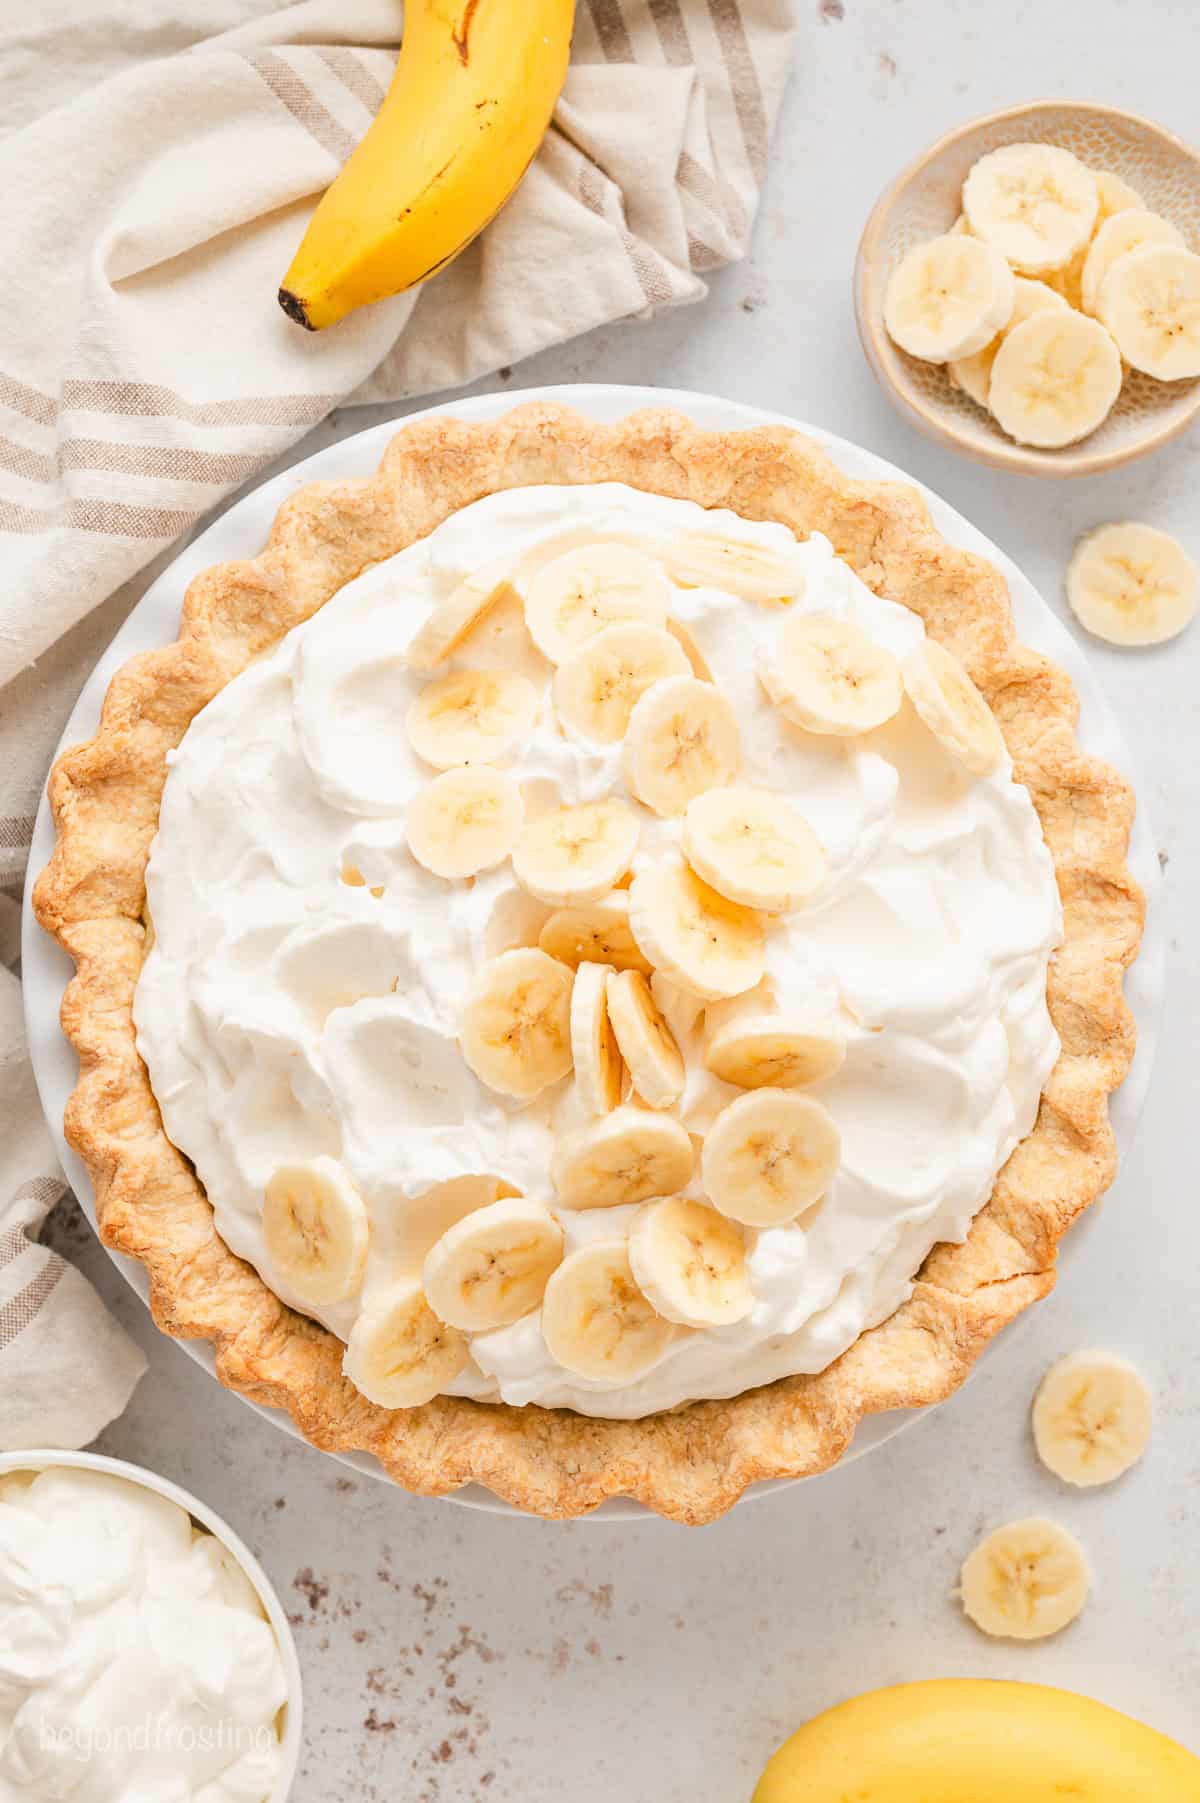 Overhead view of a whole banana cream pie garnished with banana slices, surrounded by pie ingredients.